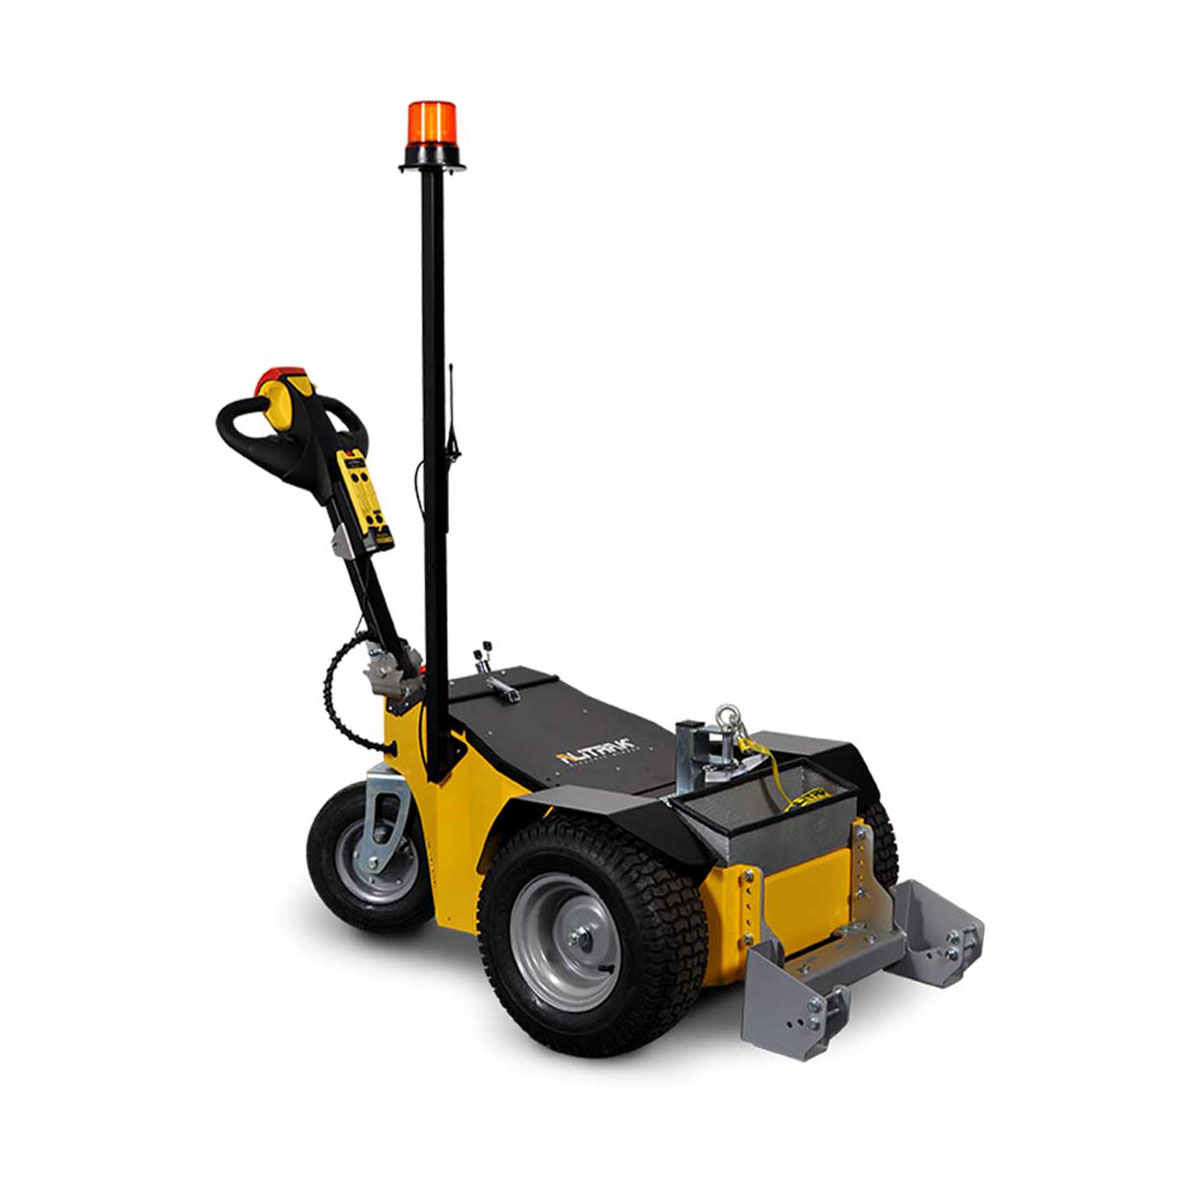 Buy Electric Tug - Trolley Remote in Electric Tugs from Alitrak available at Astrolift NZ